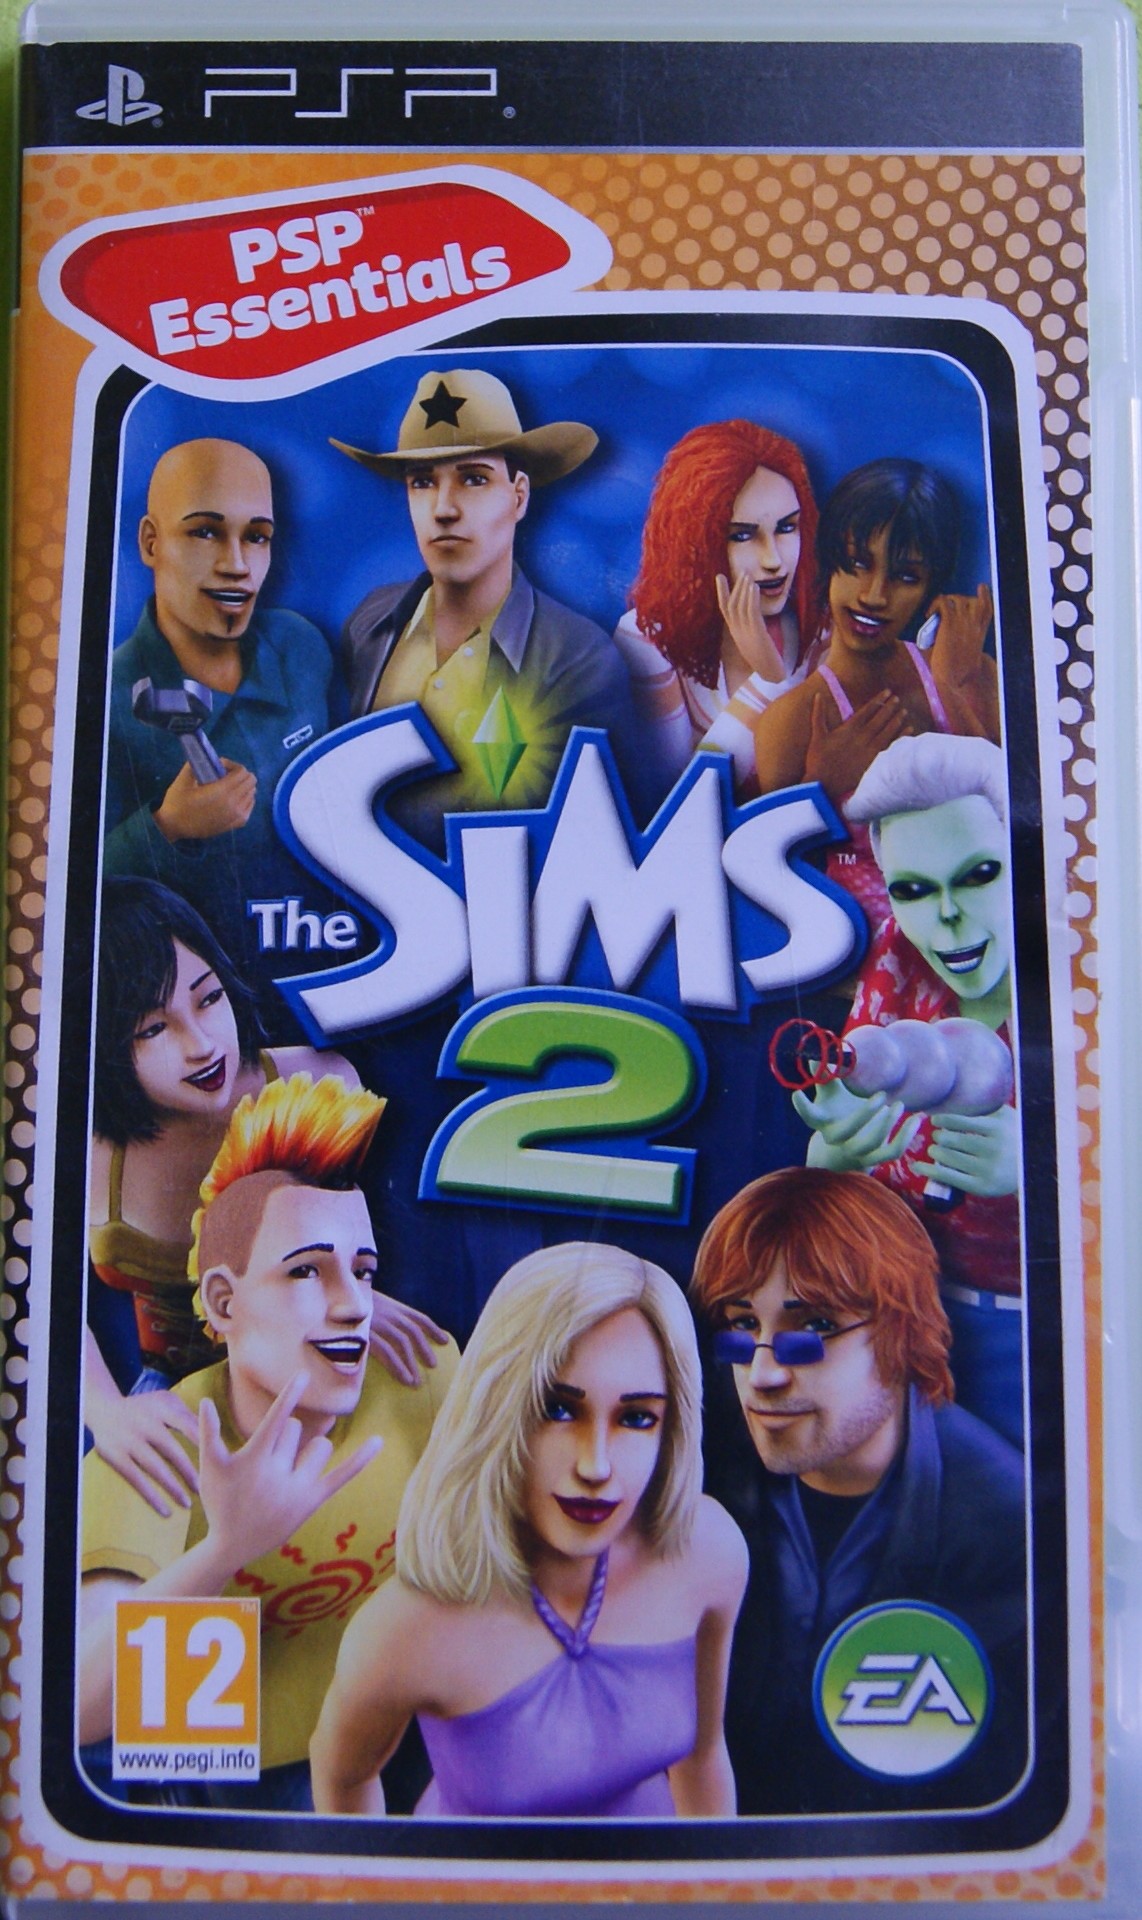 Game sims 2. SIMS 2 PSP. The SIMS 2 на ПСП. The SIMS 2 обложка. The SIMS 2 (PLAYSTATION Portable).